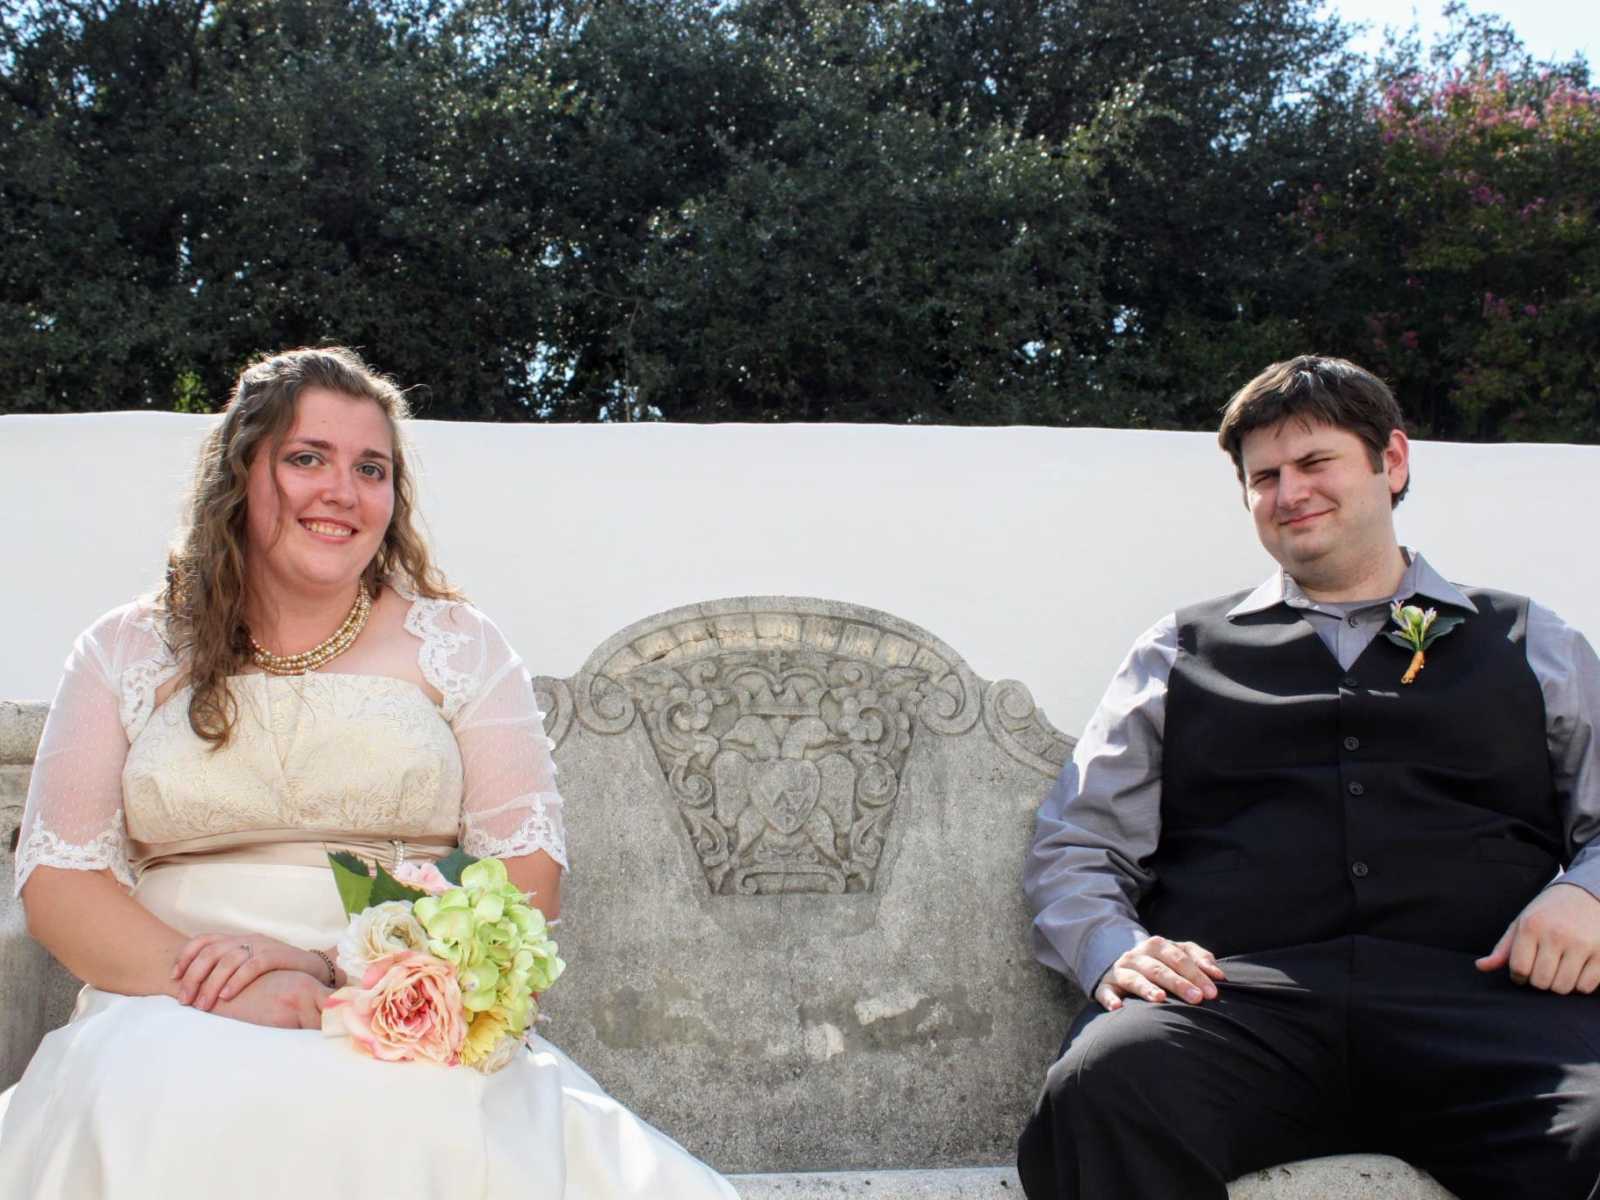 Bride and groom smile while sitting on stone bench